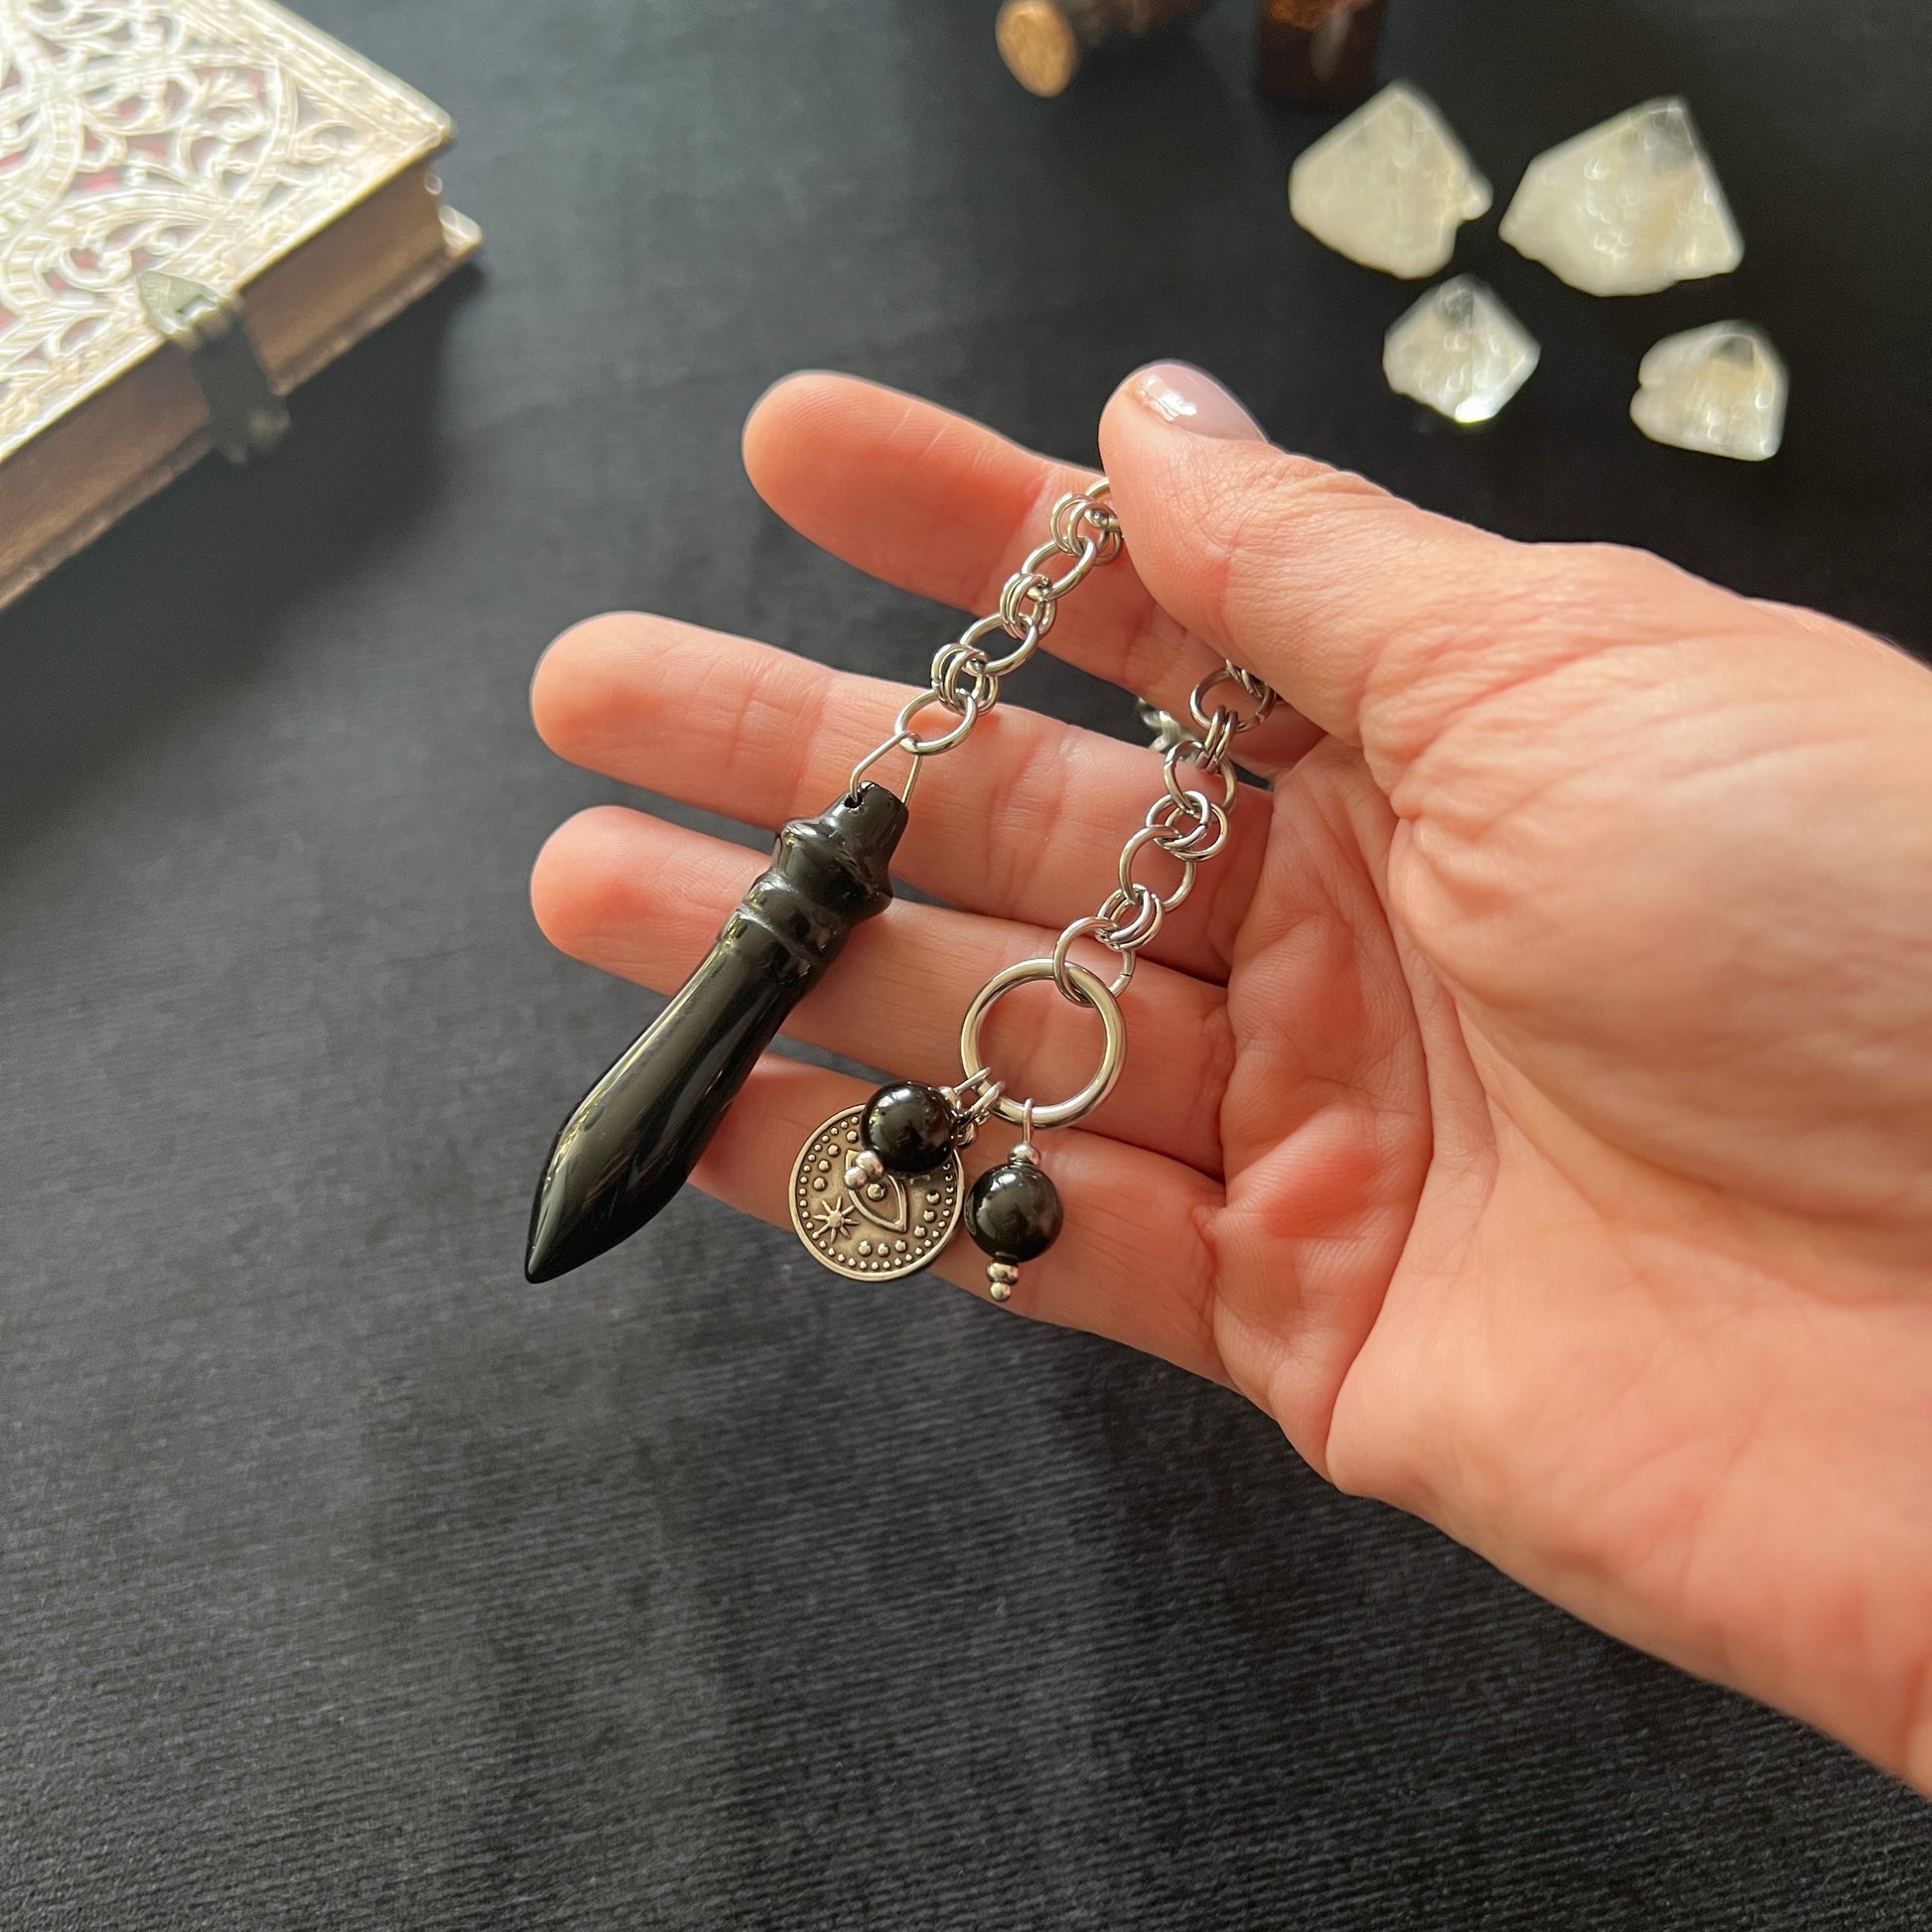 Egyptian Thot pendulum black agate chainmail, third eye charm and stainless steel Baguette Magick